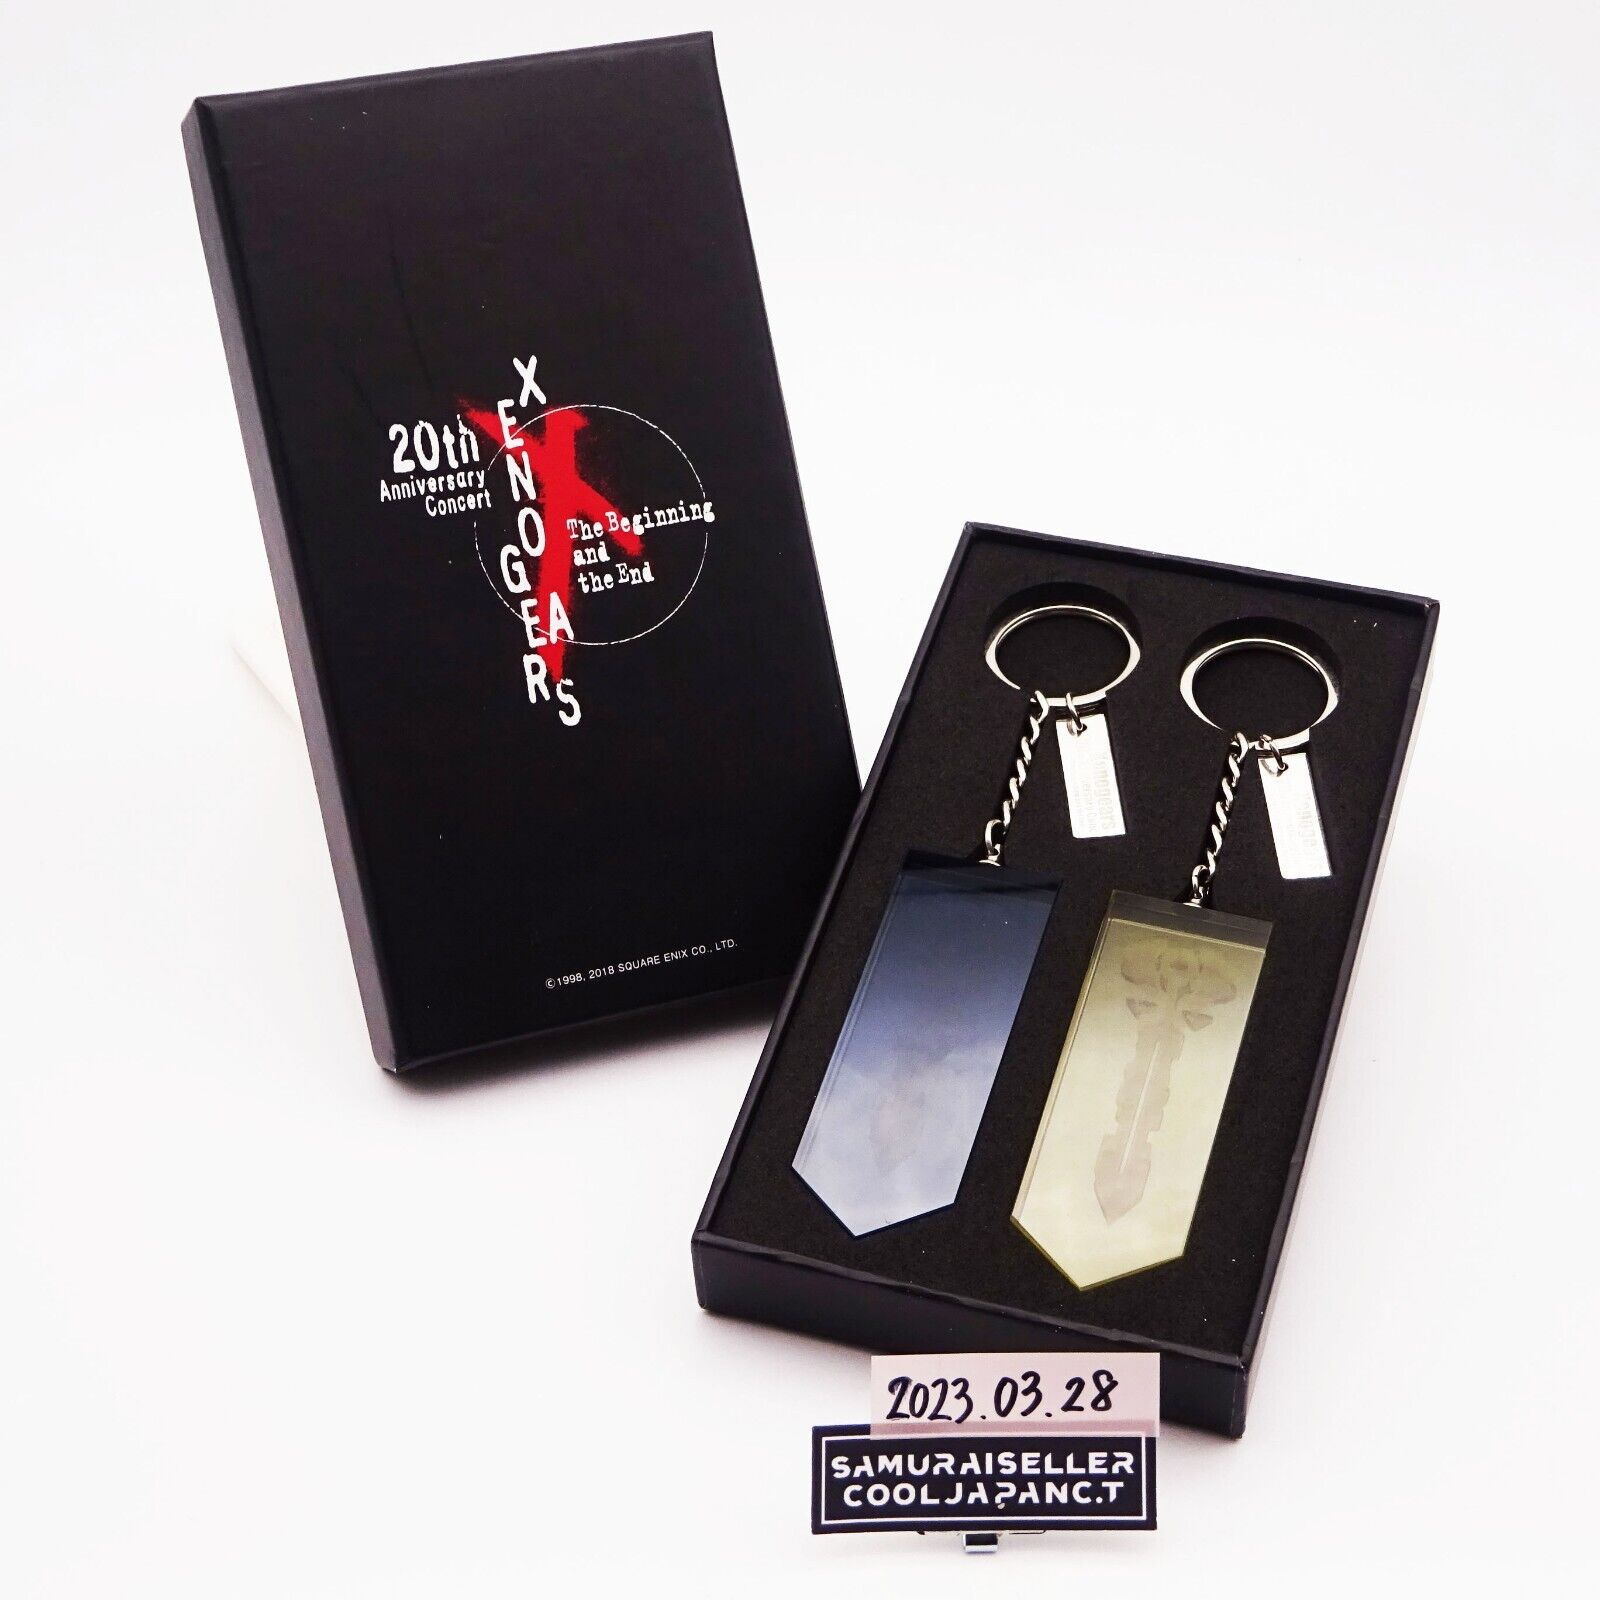 Xenogears 20th Anniversary Concert Memory Cube Crystal Keychain 2 Set Key Ring